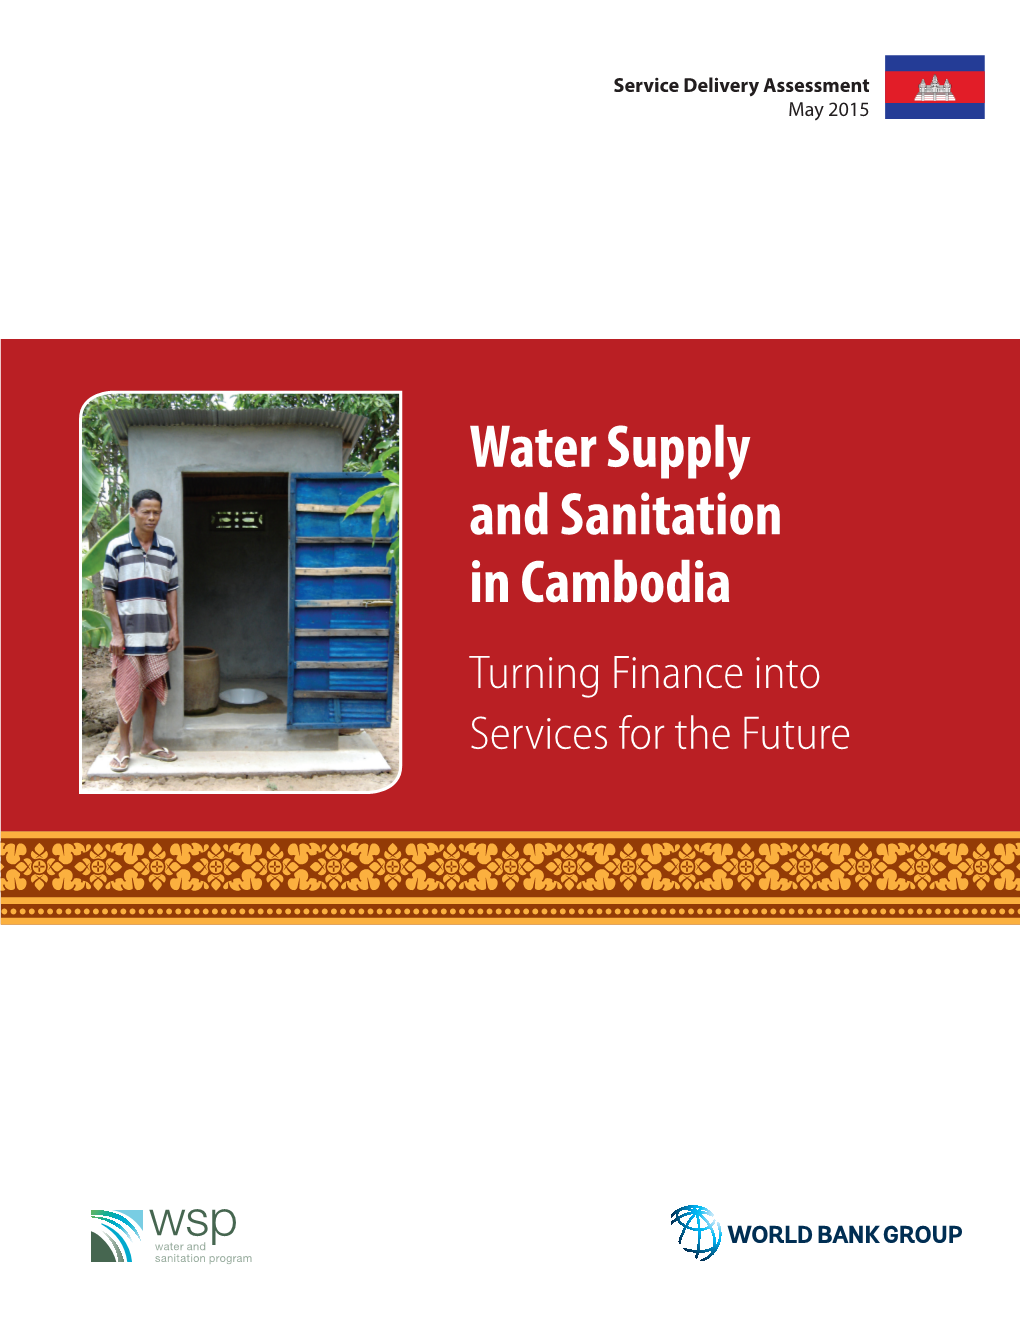 Water Supply and Sanitation in Cambodia: Turning Finance Into Services for the Future